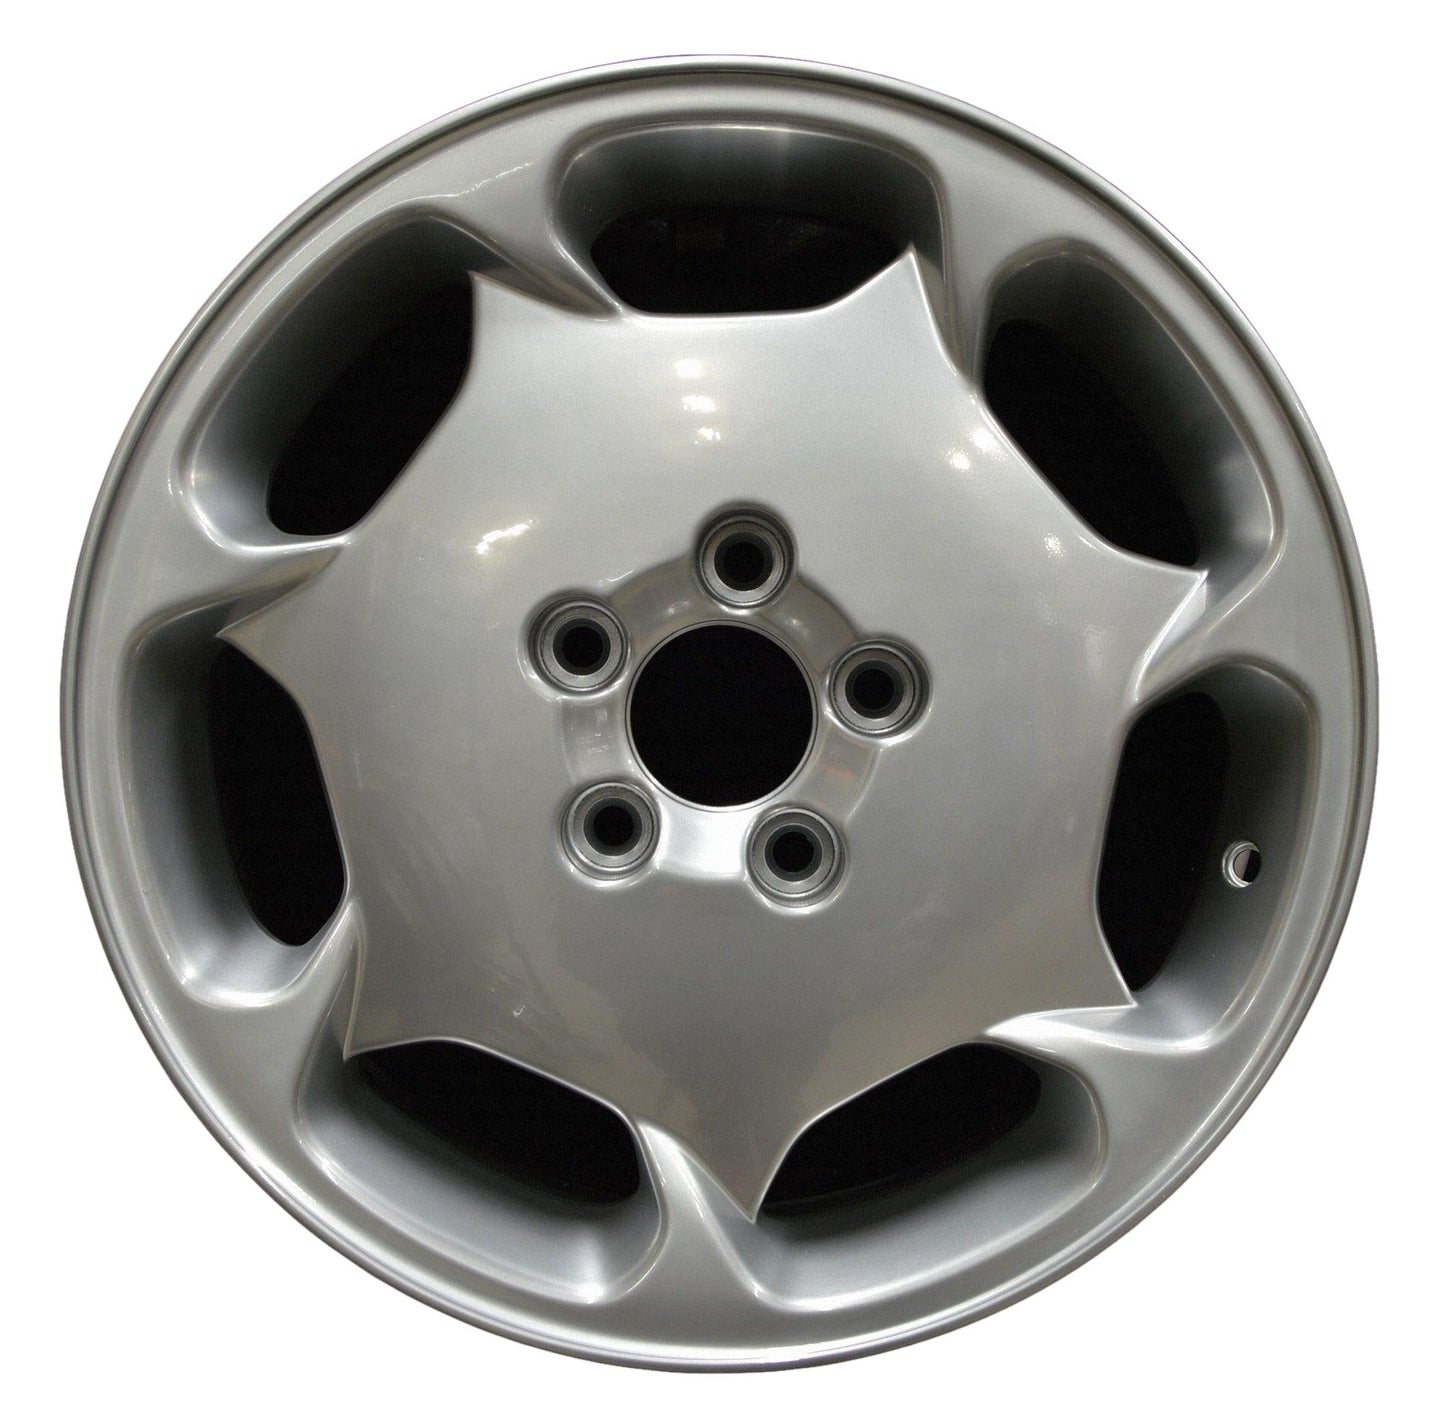 Volvo 70 Series  1998, 1999, 2000 Factory OEM Car Wheel Size 16x7 Alloy WAO.70206.PS11.FF